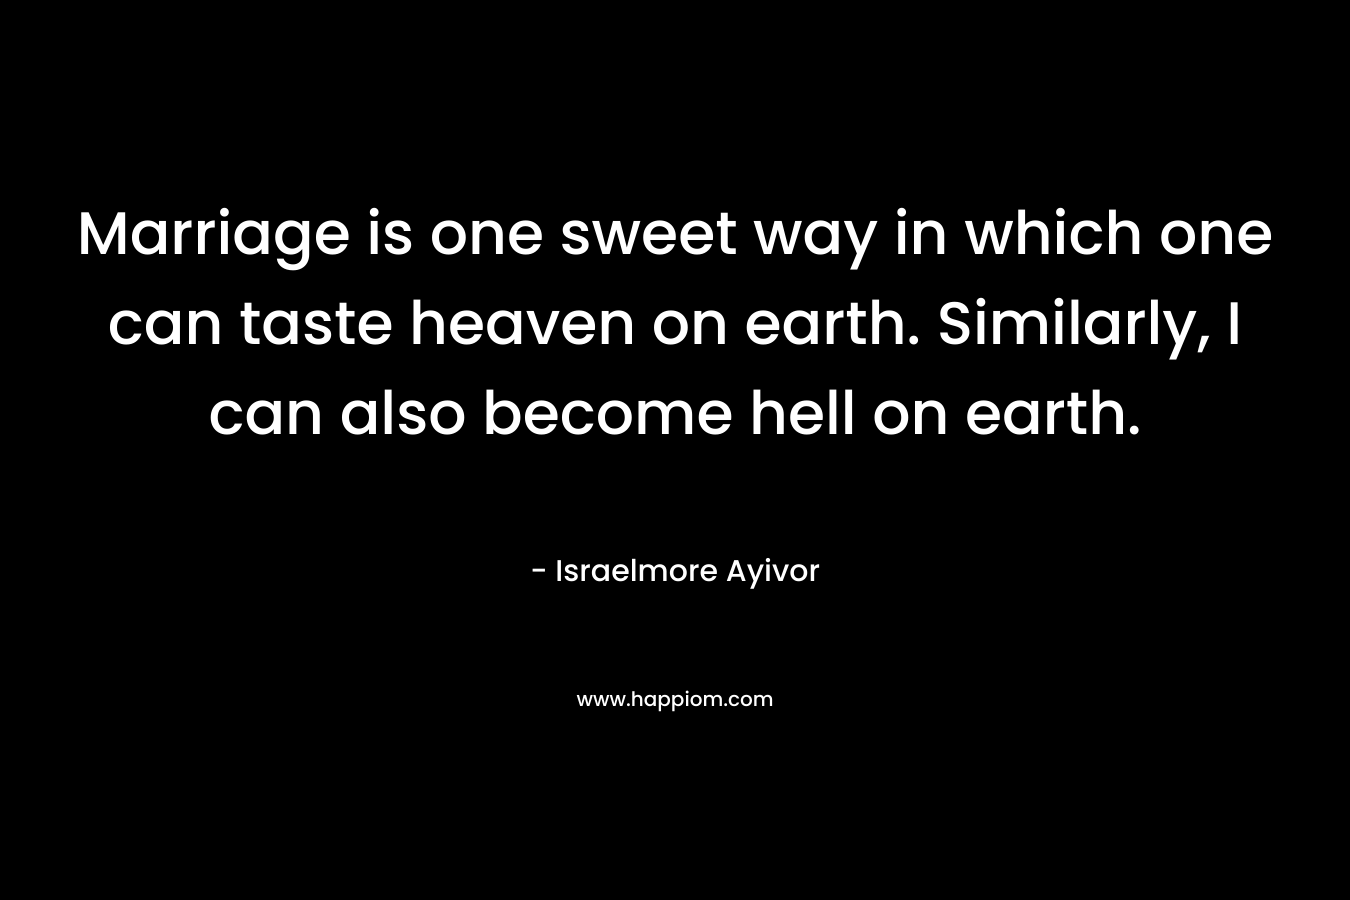 Marriage is one sweet way in which one can taste heaven on earth. Similarly, I can also become hell on earth.